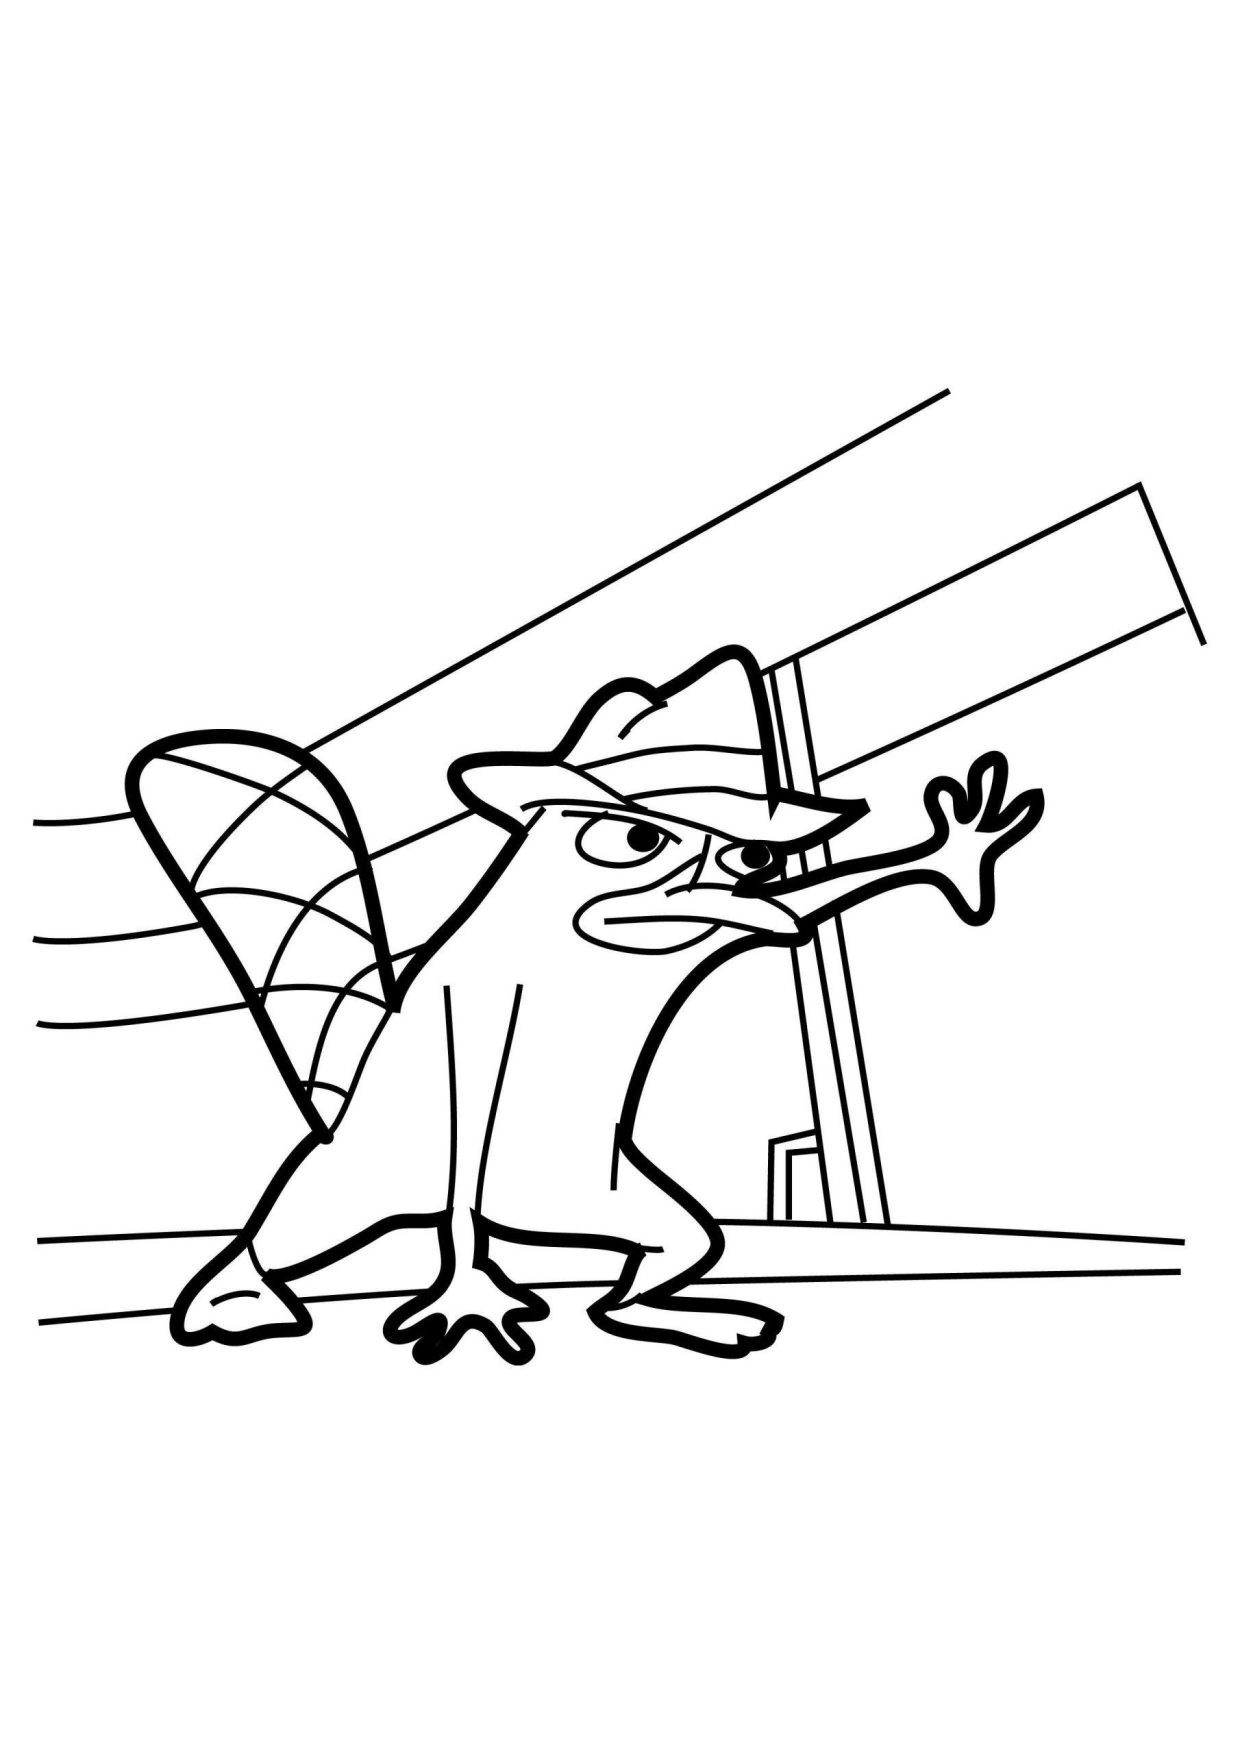 perry the platypus phineas and ferb coloring pages